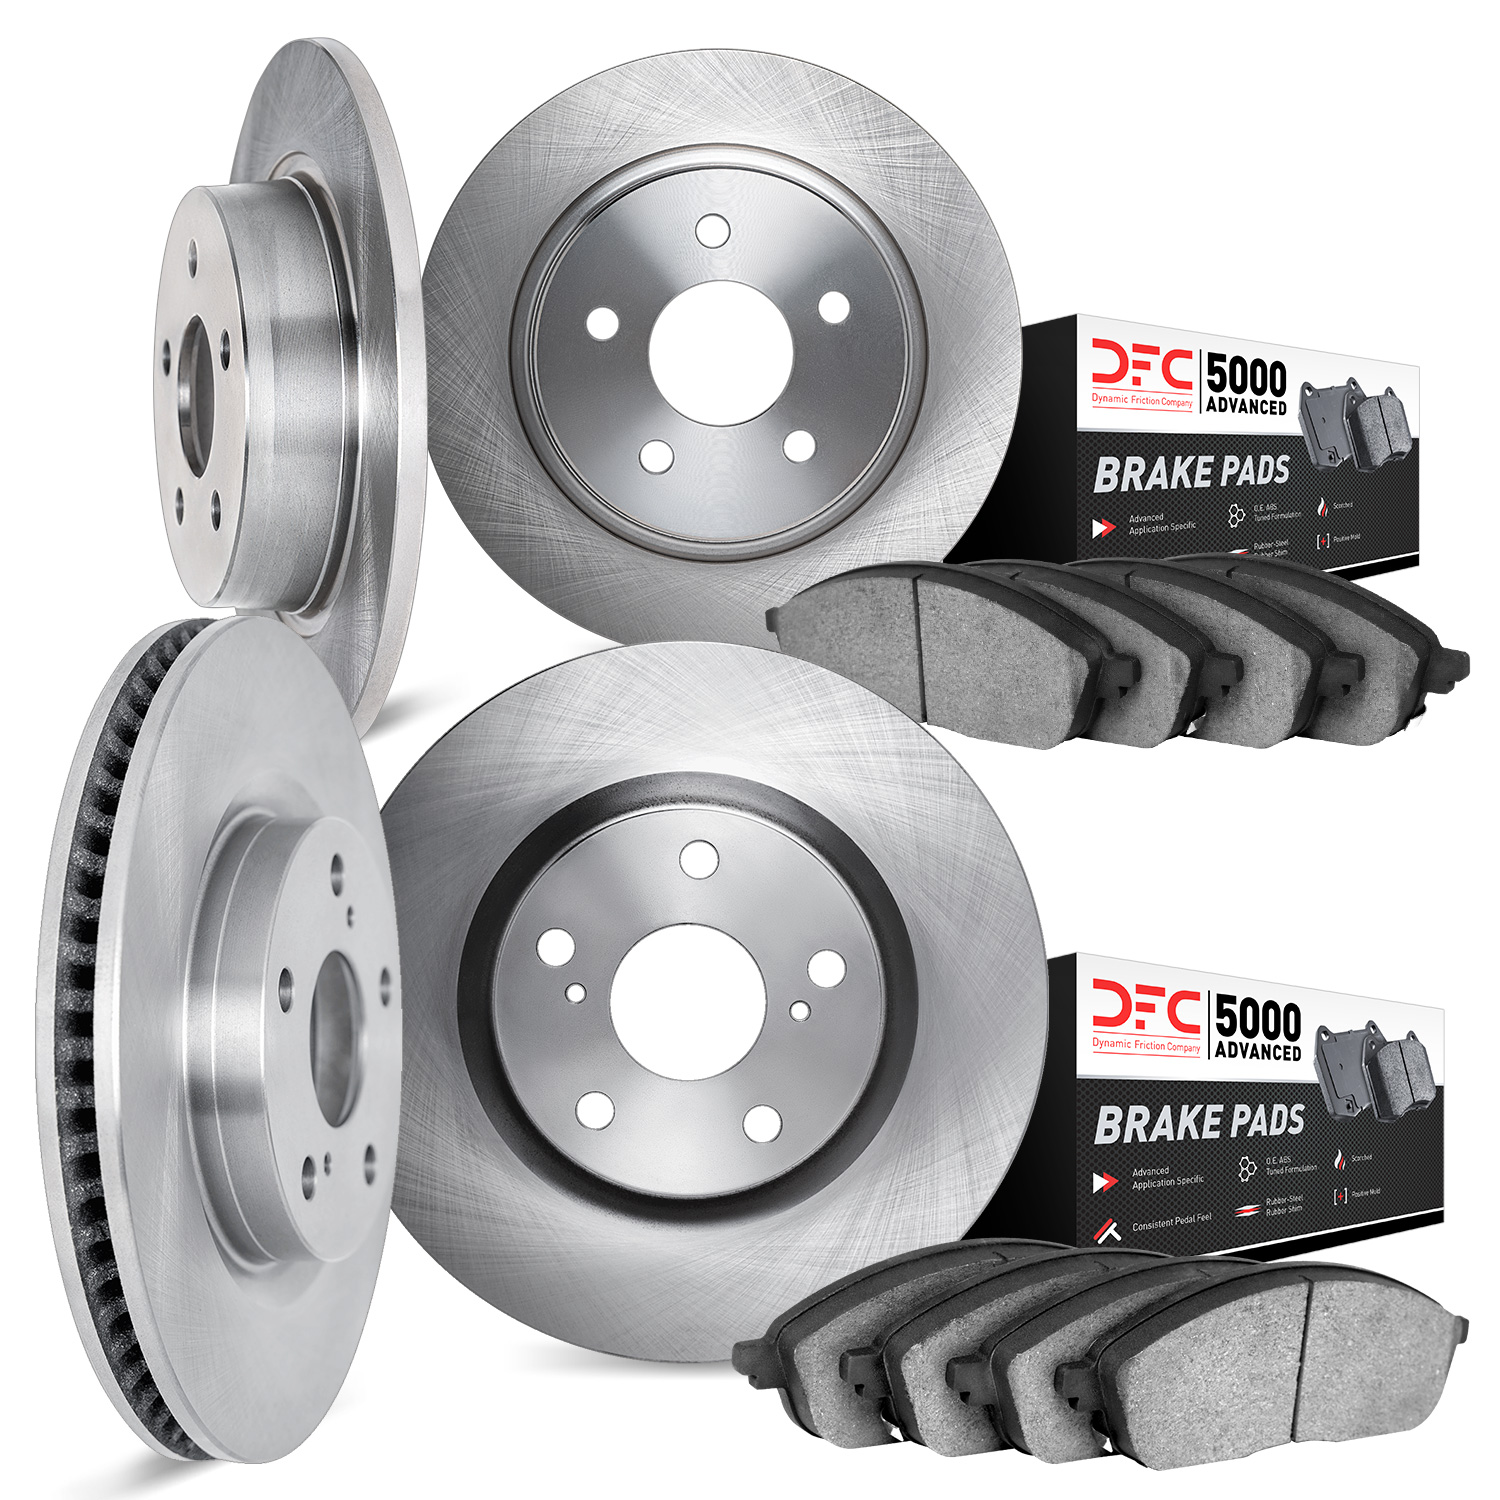 6504-31018 Brake Rotors w/5000 Advanced Brake Pads Kit, 1995-2001 BMW, Position: Front and Rear